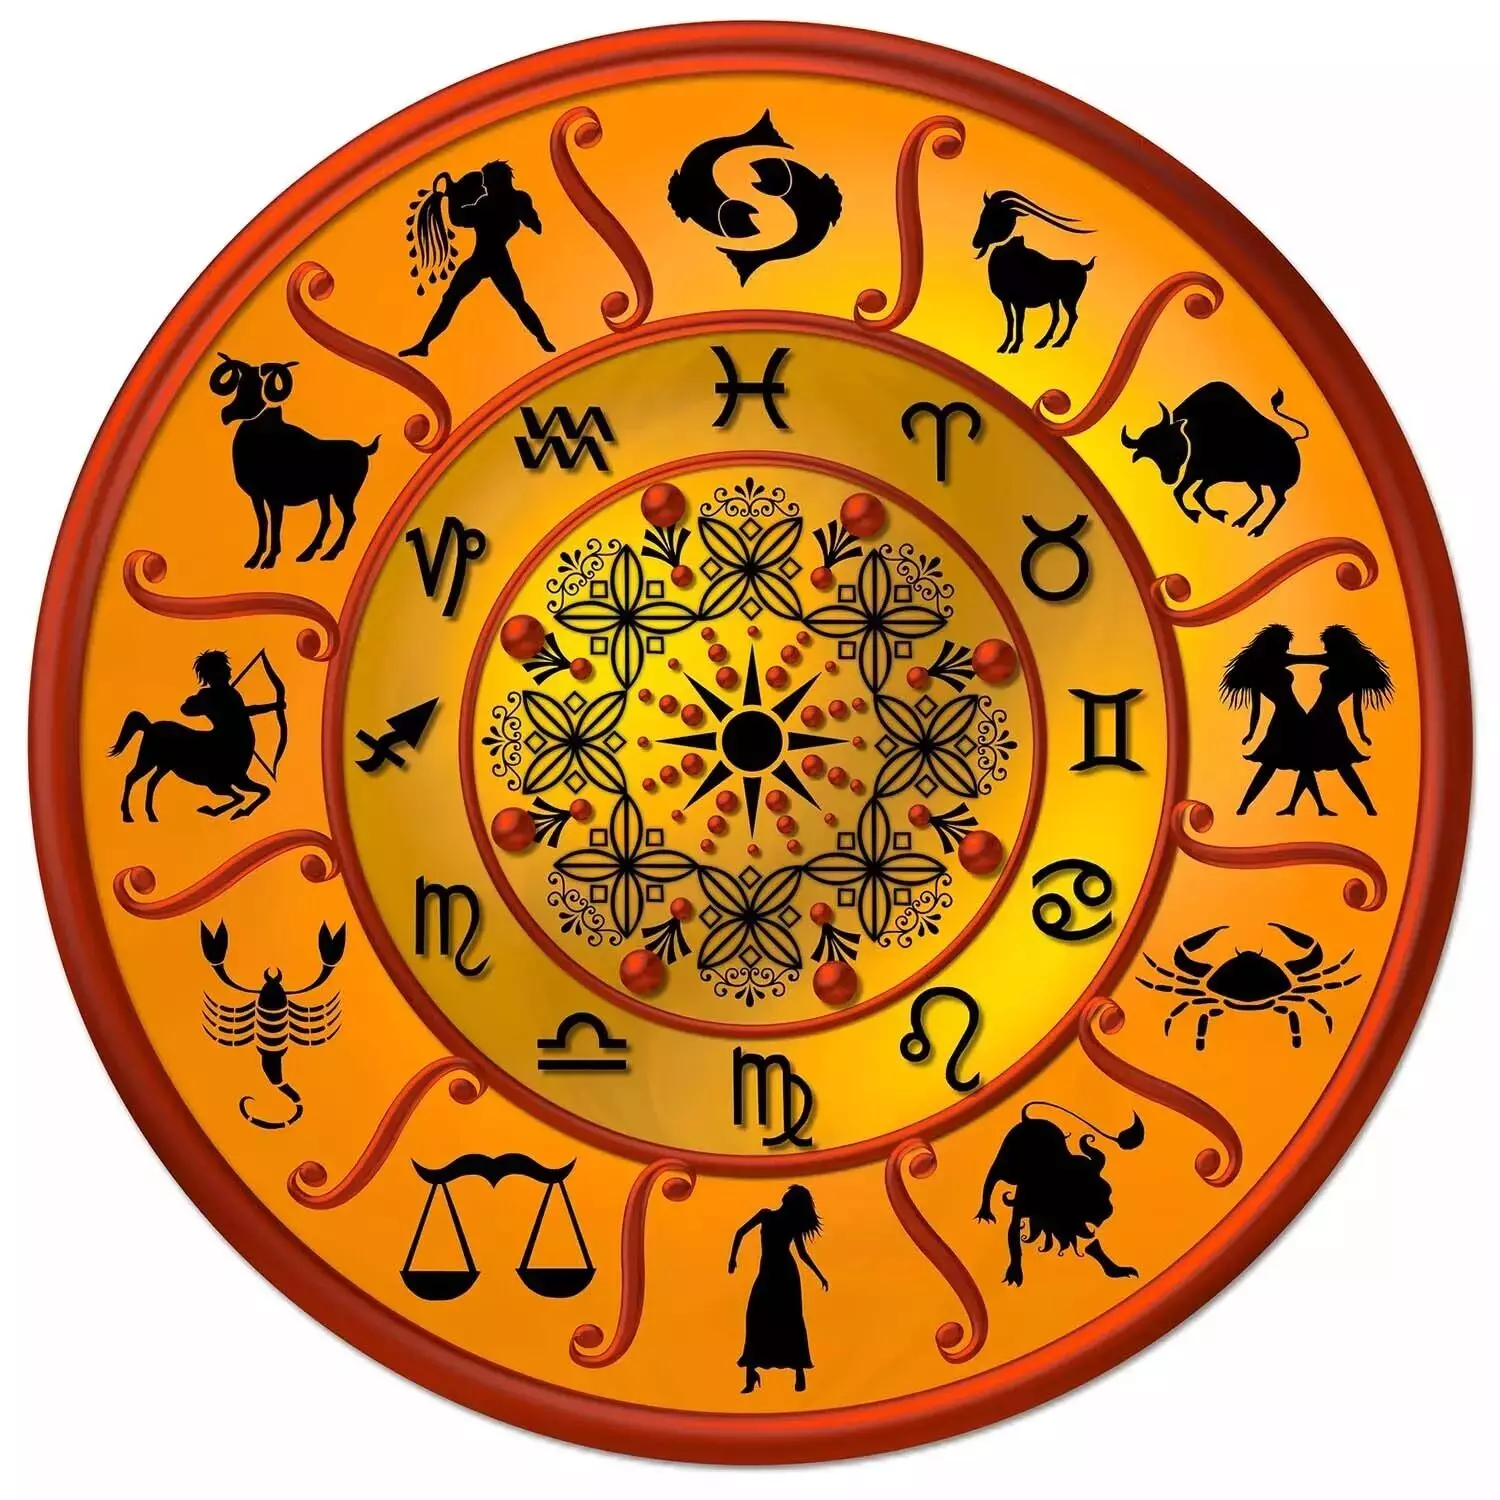 08  October  – Know your todays horoscope